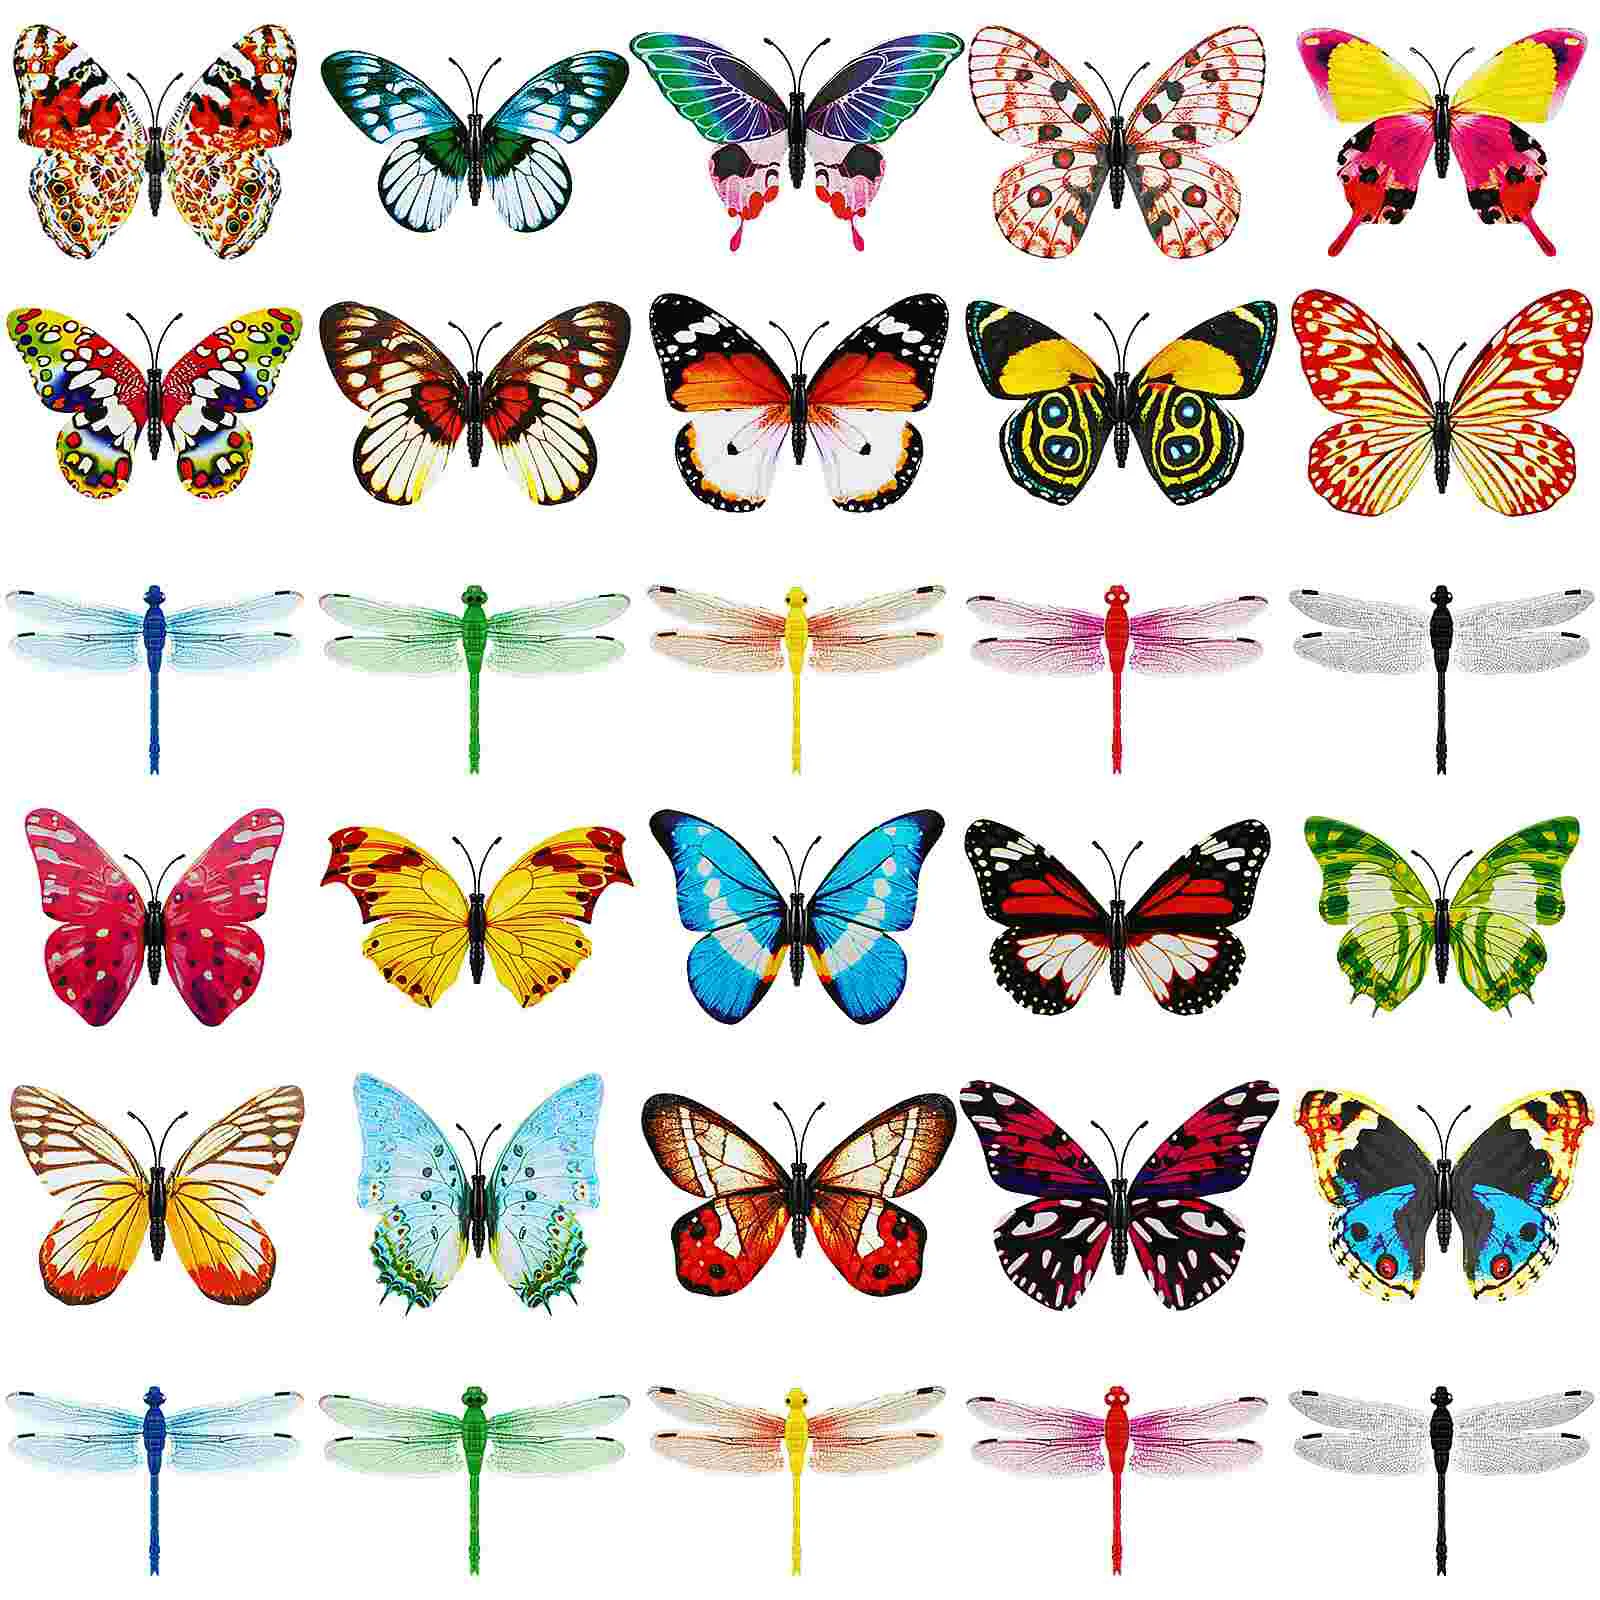 

30pcs Butterfly Stakes Decors Yard Ornaments Dragonfly Garden Stakes for Pathway Patio